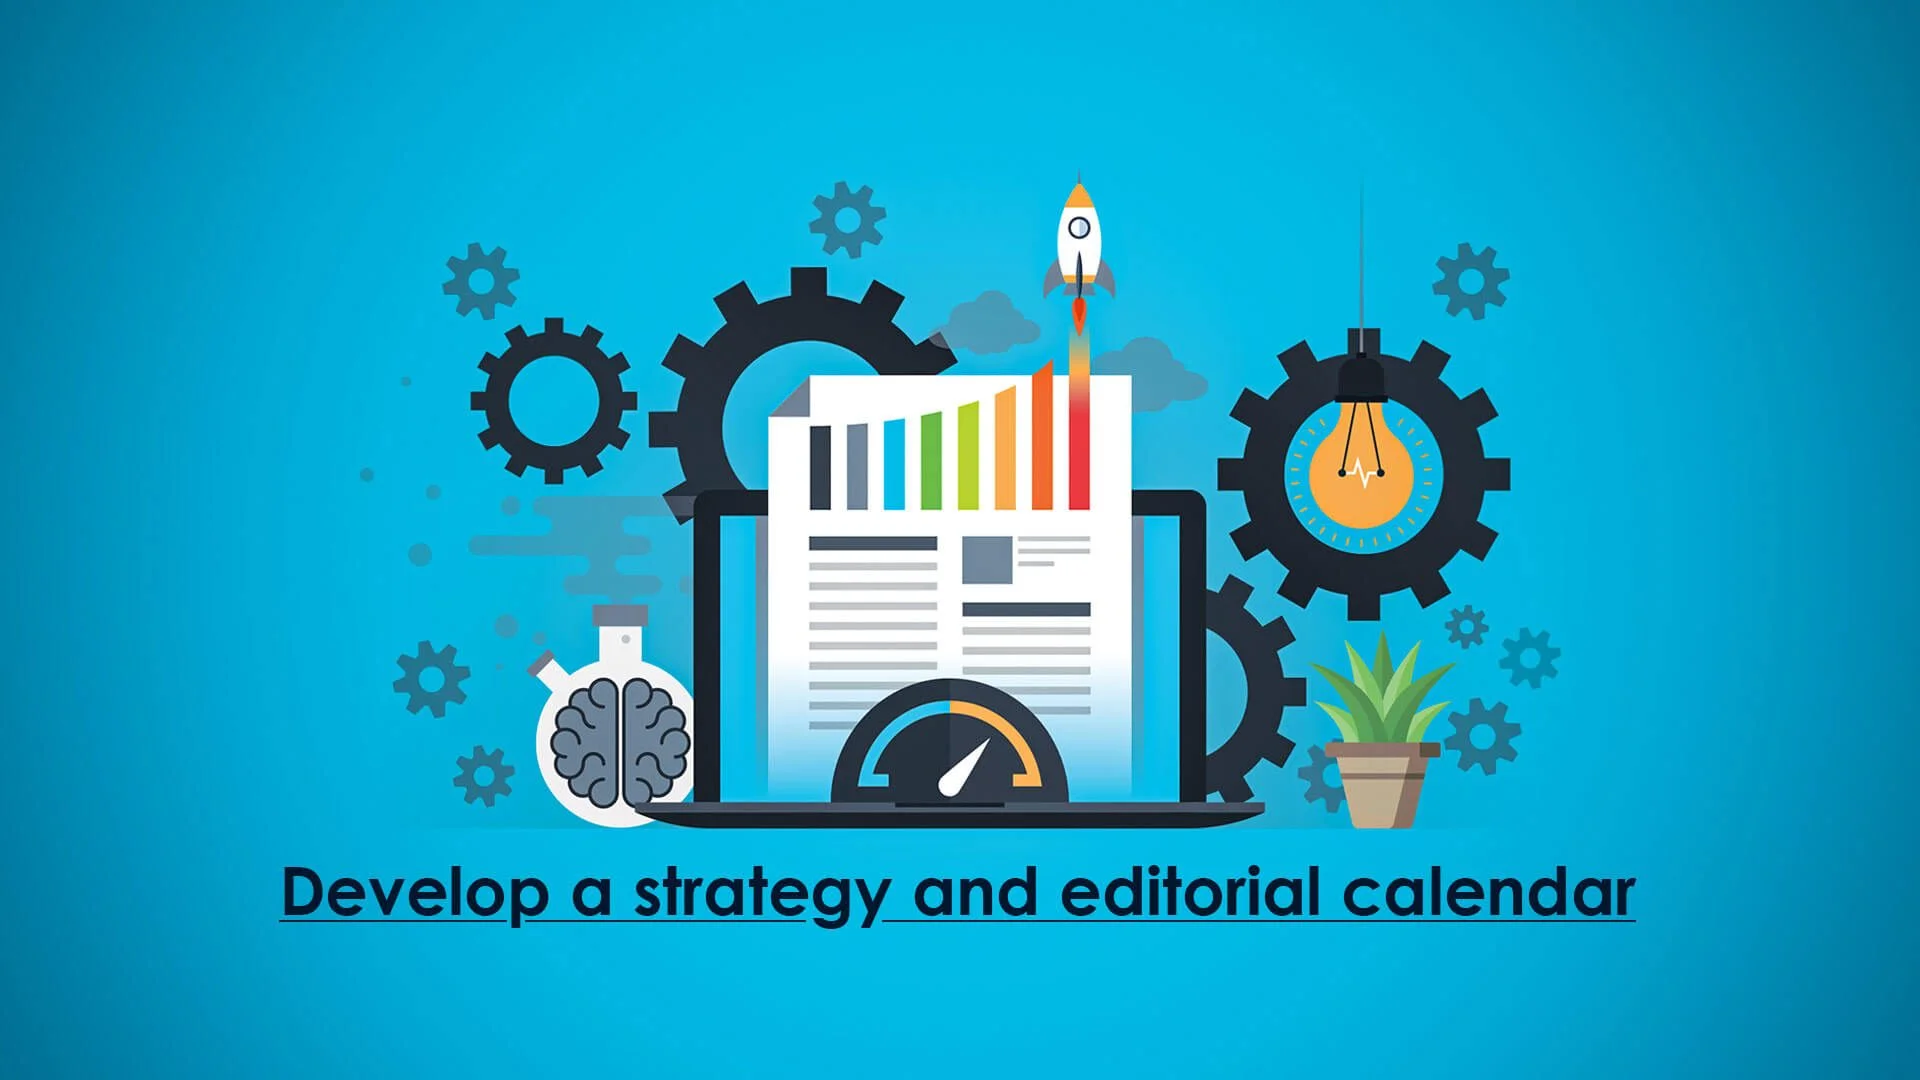 Develop a strategy and editorial calendar to make a solid digital marketing tactics